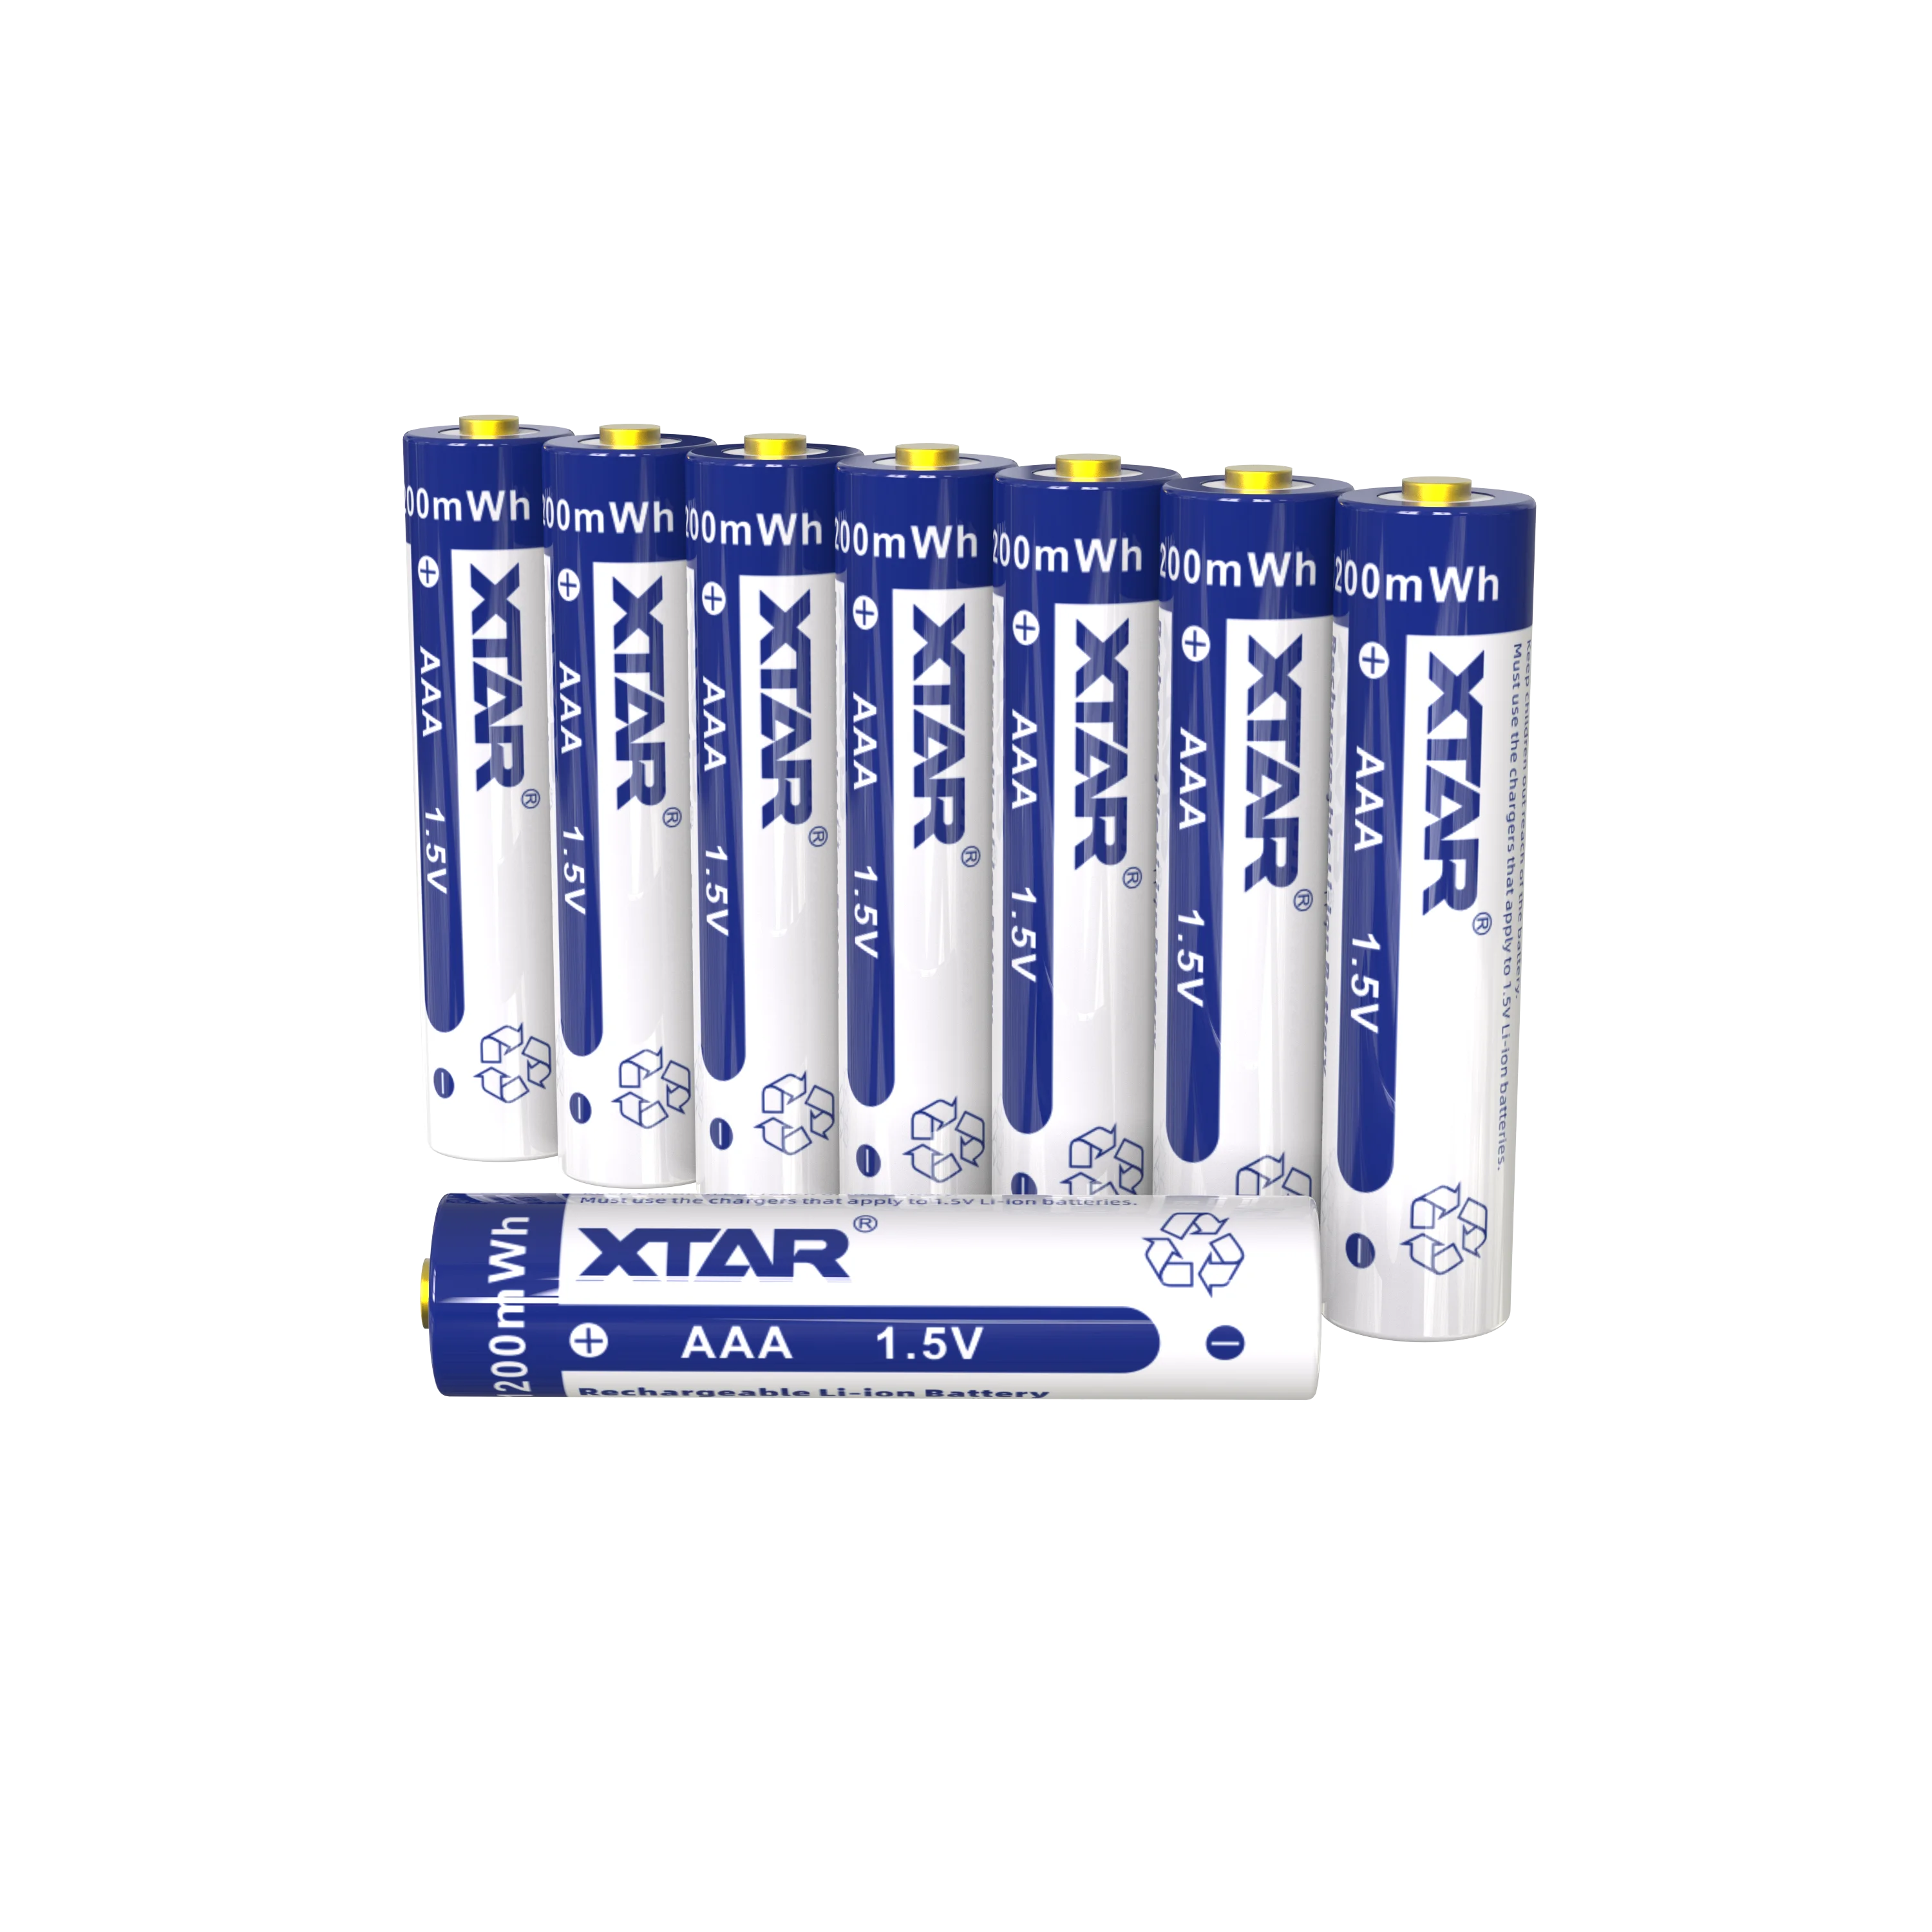 XTAR 4PCS 1.5V  AAA Battery 1200 mWh Rechargeable Li-ion Battery Max Discharge Current 1.5A Button Top Battery For Kids Toys